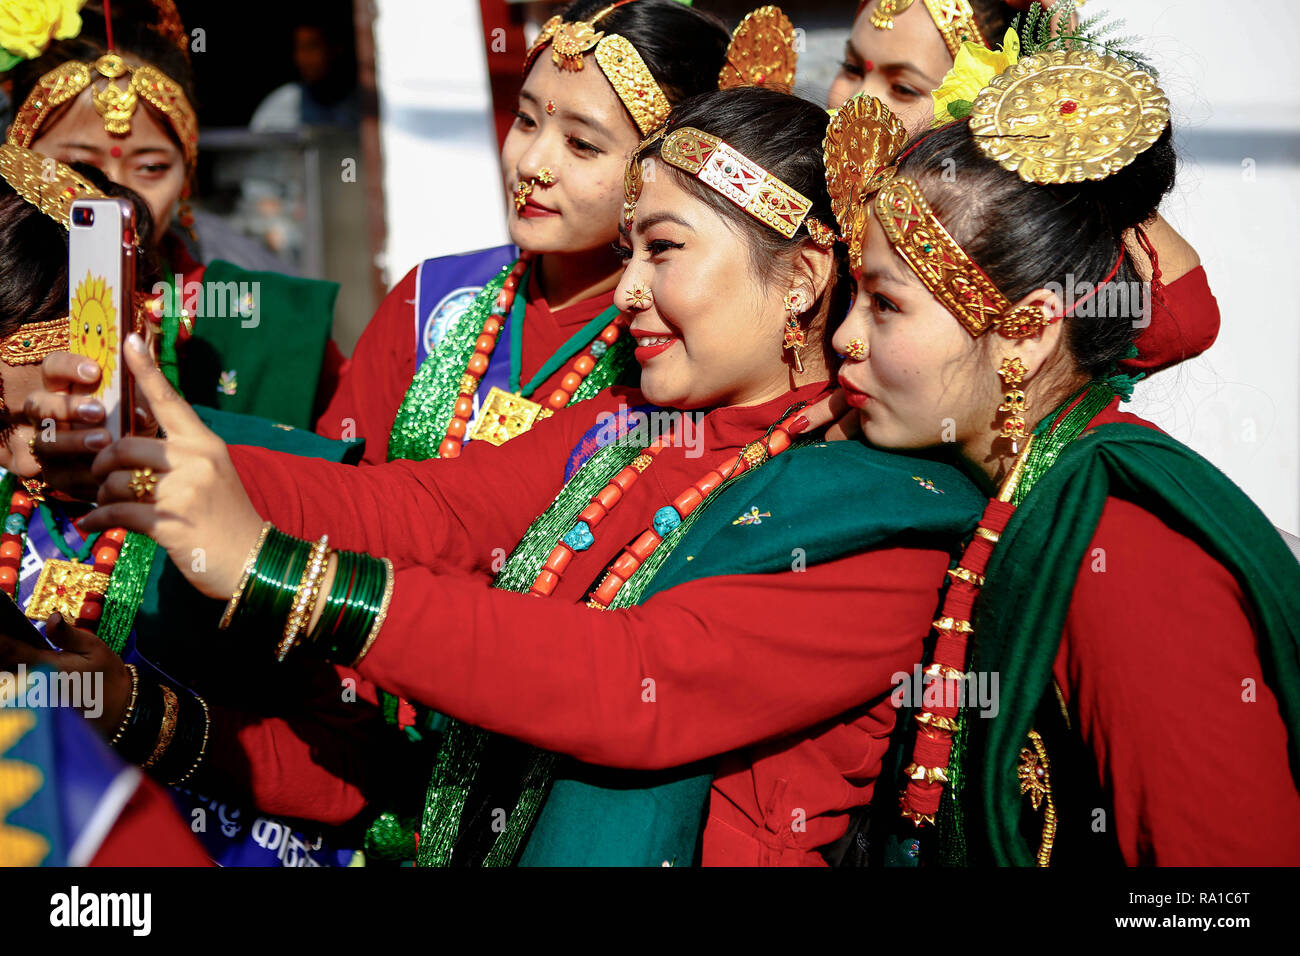 nepalese women from ethnic gurung community in traditional attire take photos as they take part in parade to mark their new year also known as tamu losar the indigenous gurungs also known as tamu are celebrating the advent of the year of the deer RA1C6T